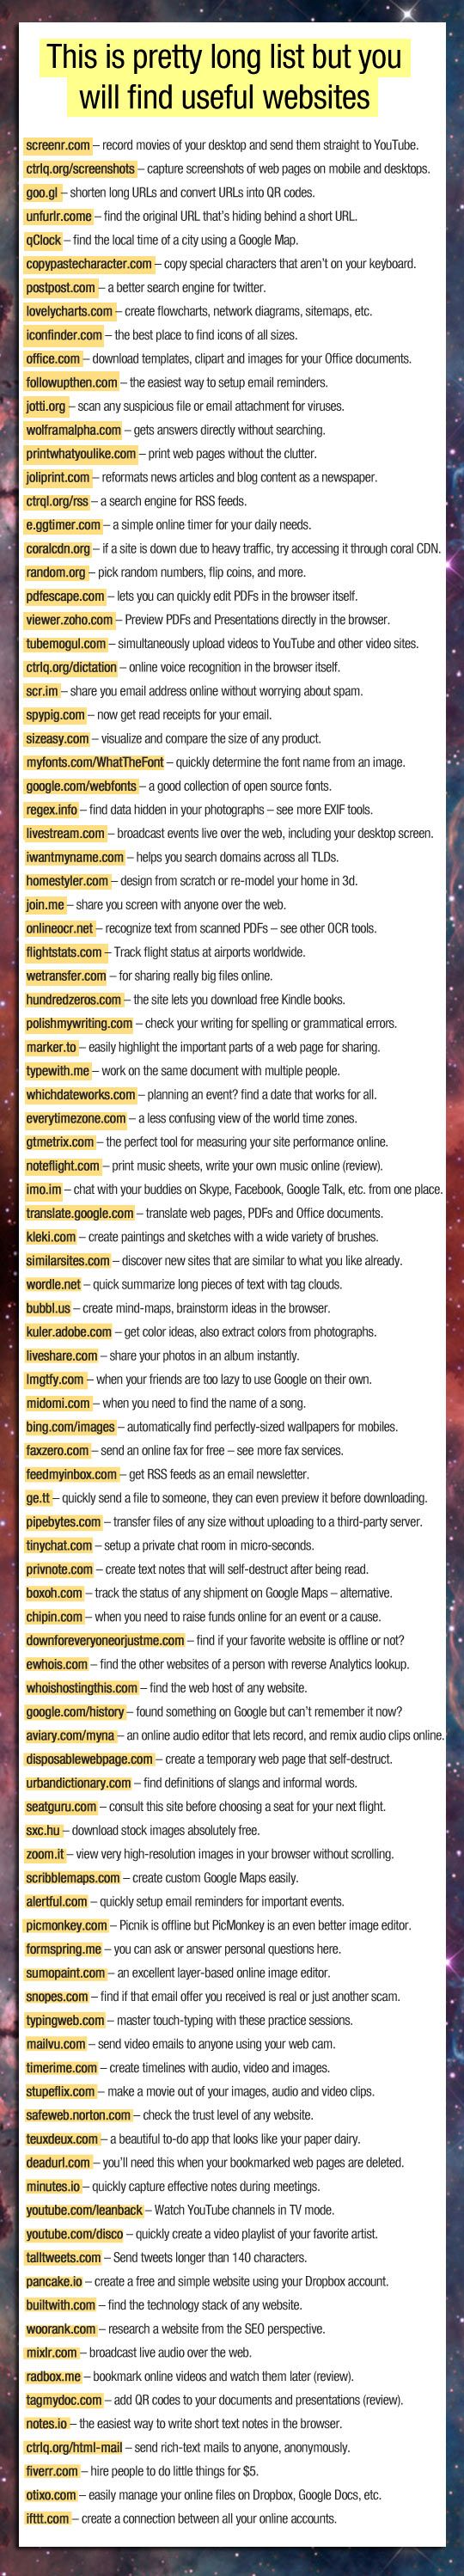 This Is A Pretty Long List But You Will Find Useful Websites